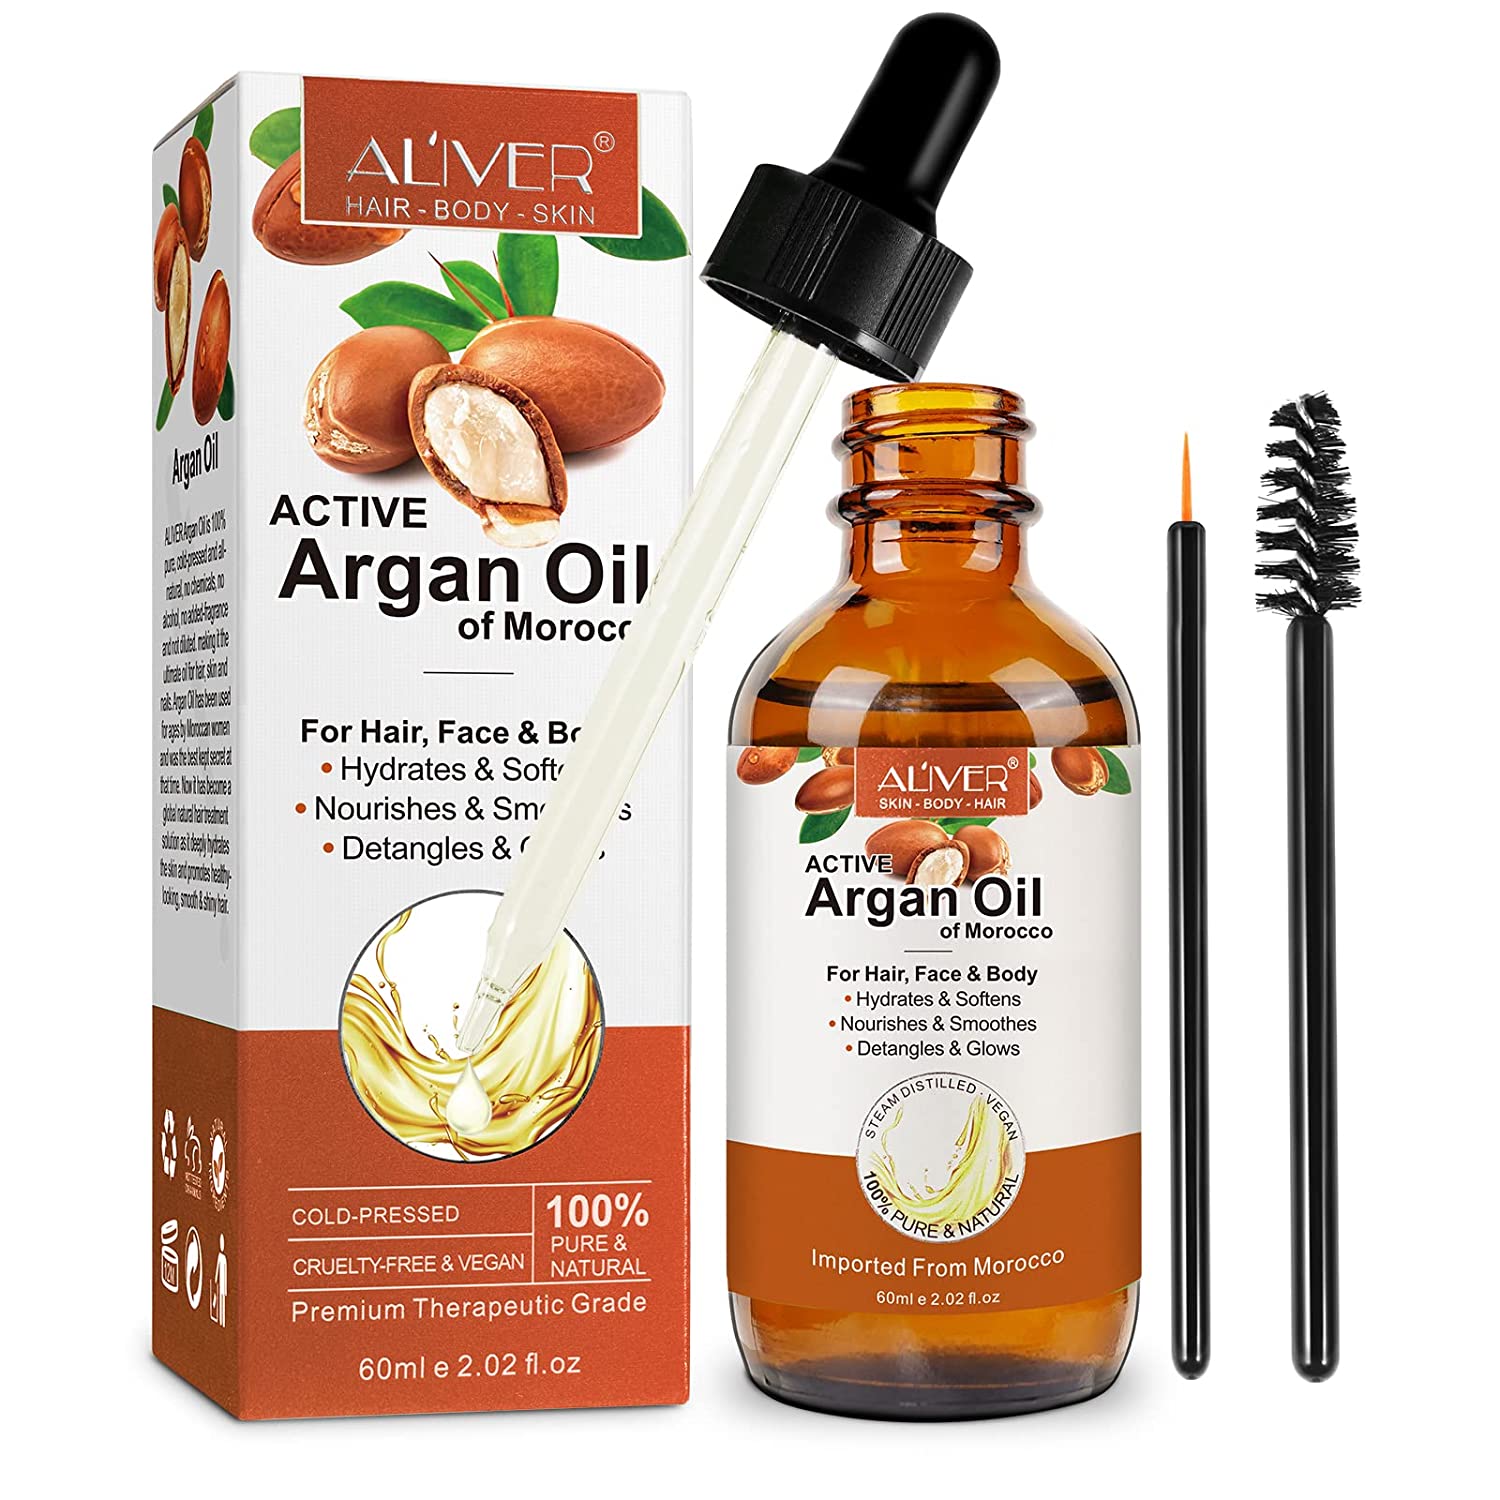 bieyoc Argan Oil, 100% Pure Moroccan Argan Oil for Hair, Treatment for Damaged Hair and Dry Skin, Cold Pressed Oil for Hair, Beard, Nails and Skin